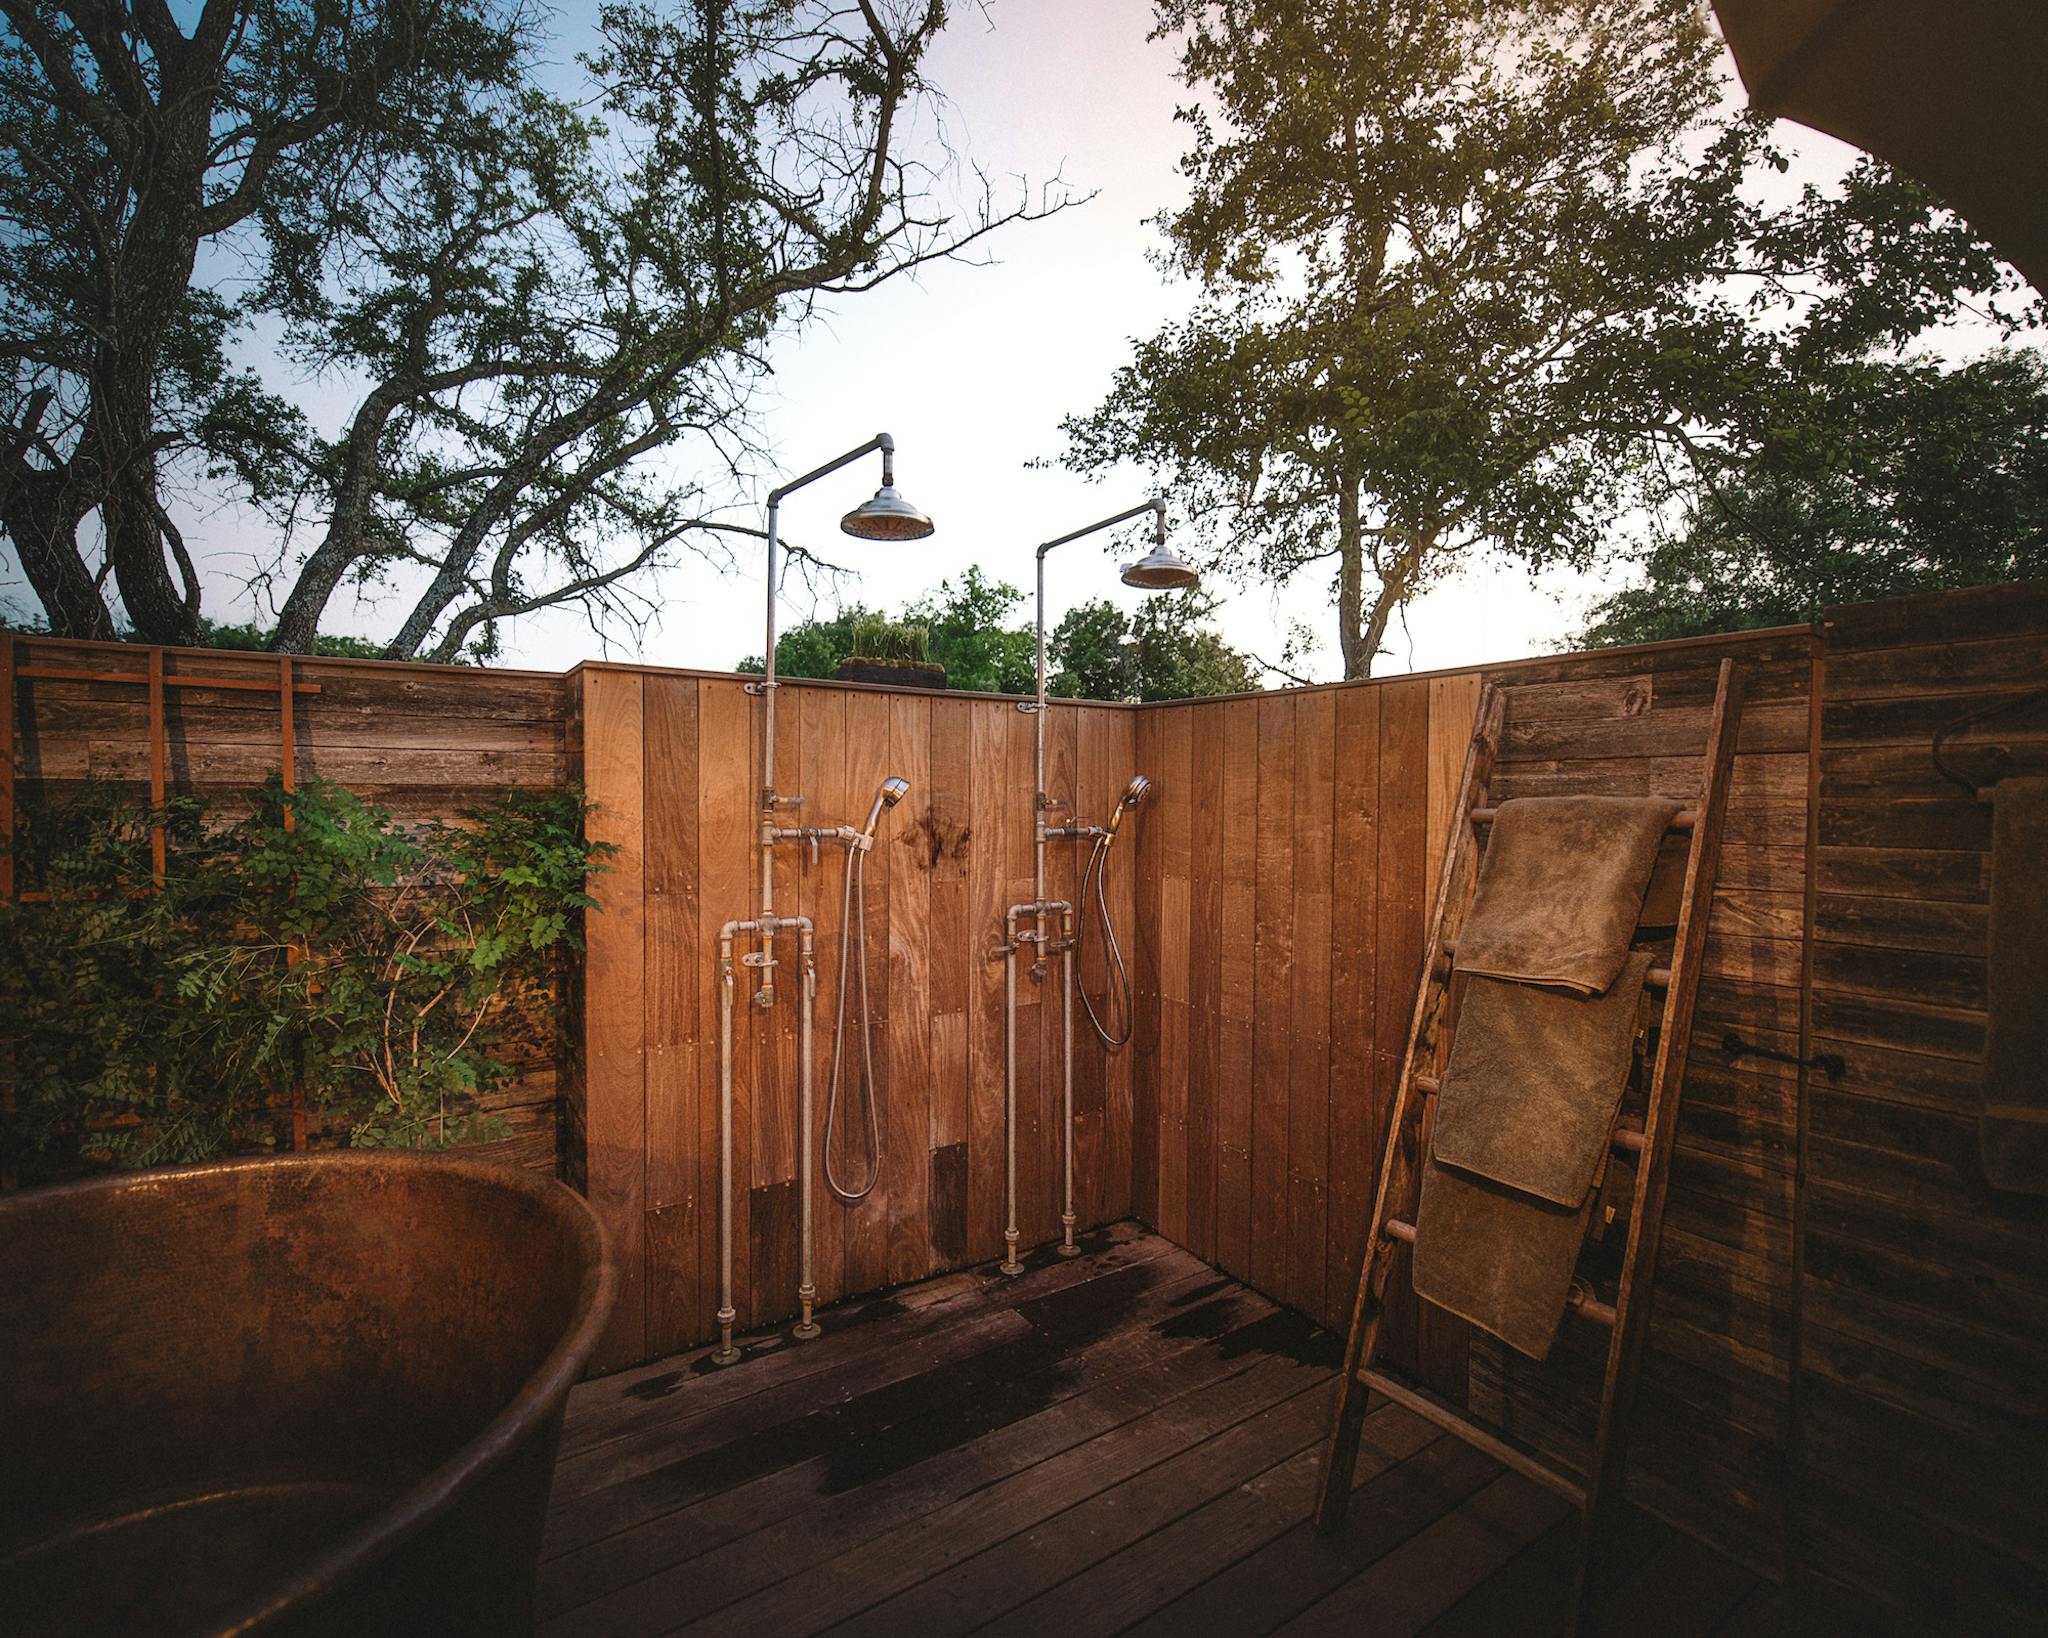 Outdoor showers surrounded by wooden fence.